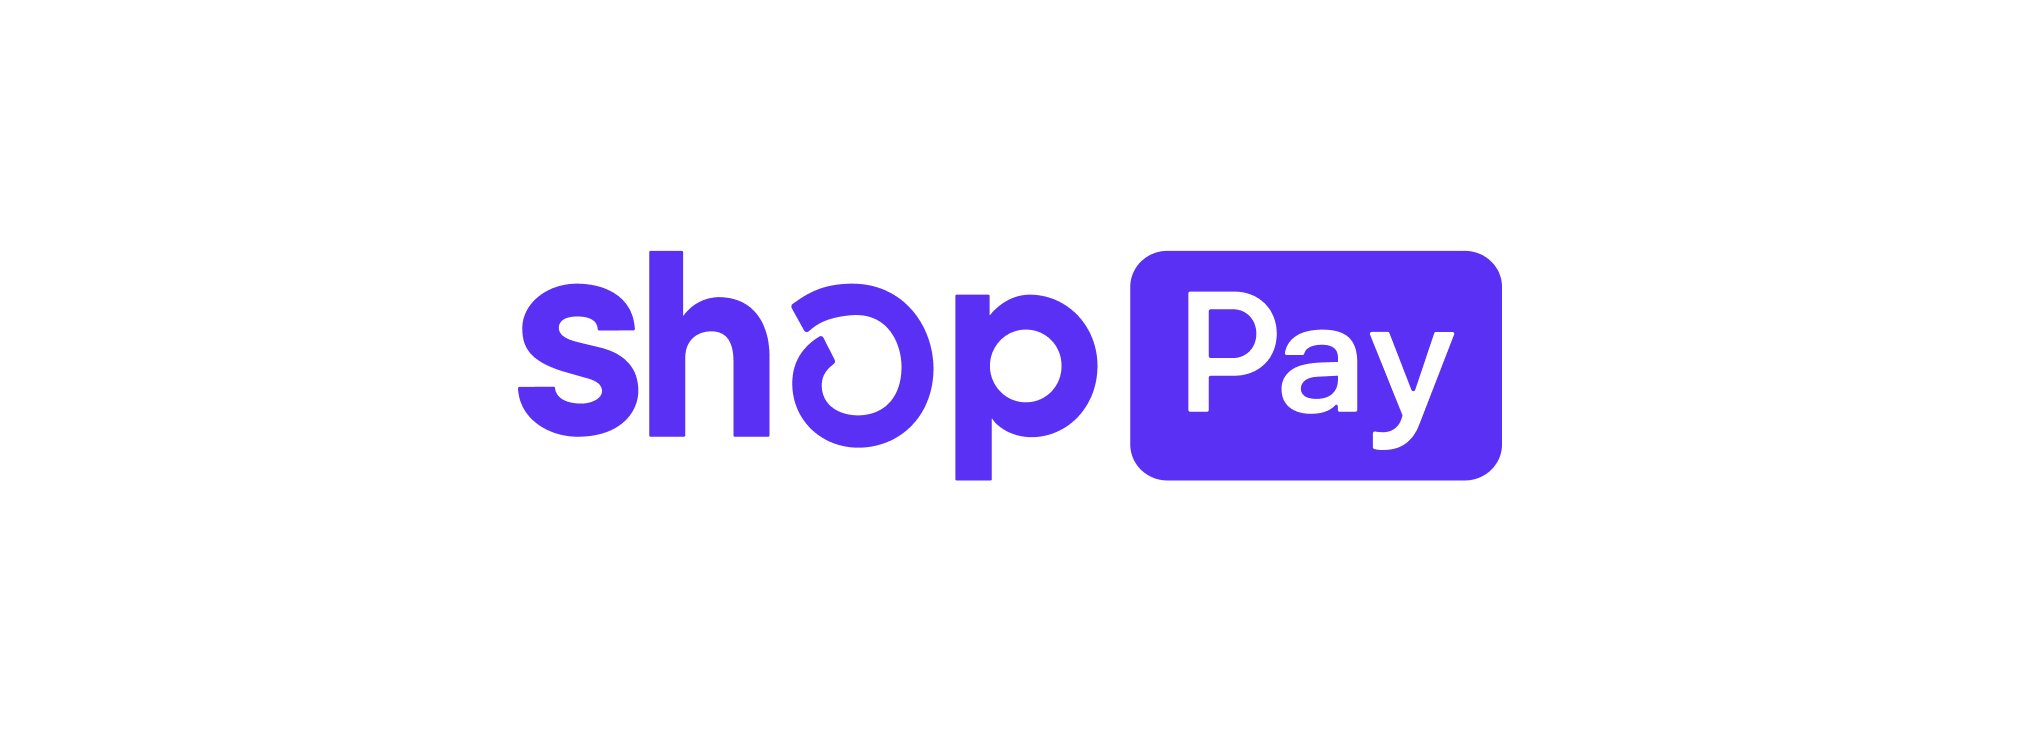 Guidelines for using the Shop Pay logo · Shopify Help Center